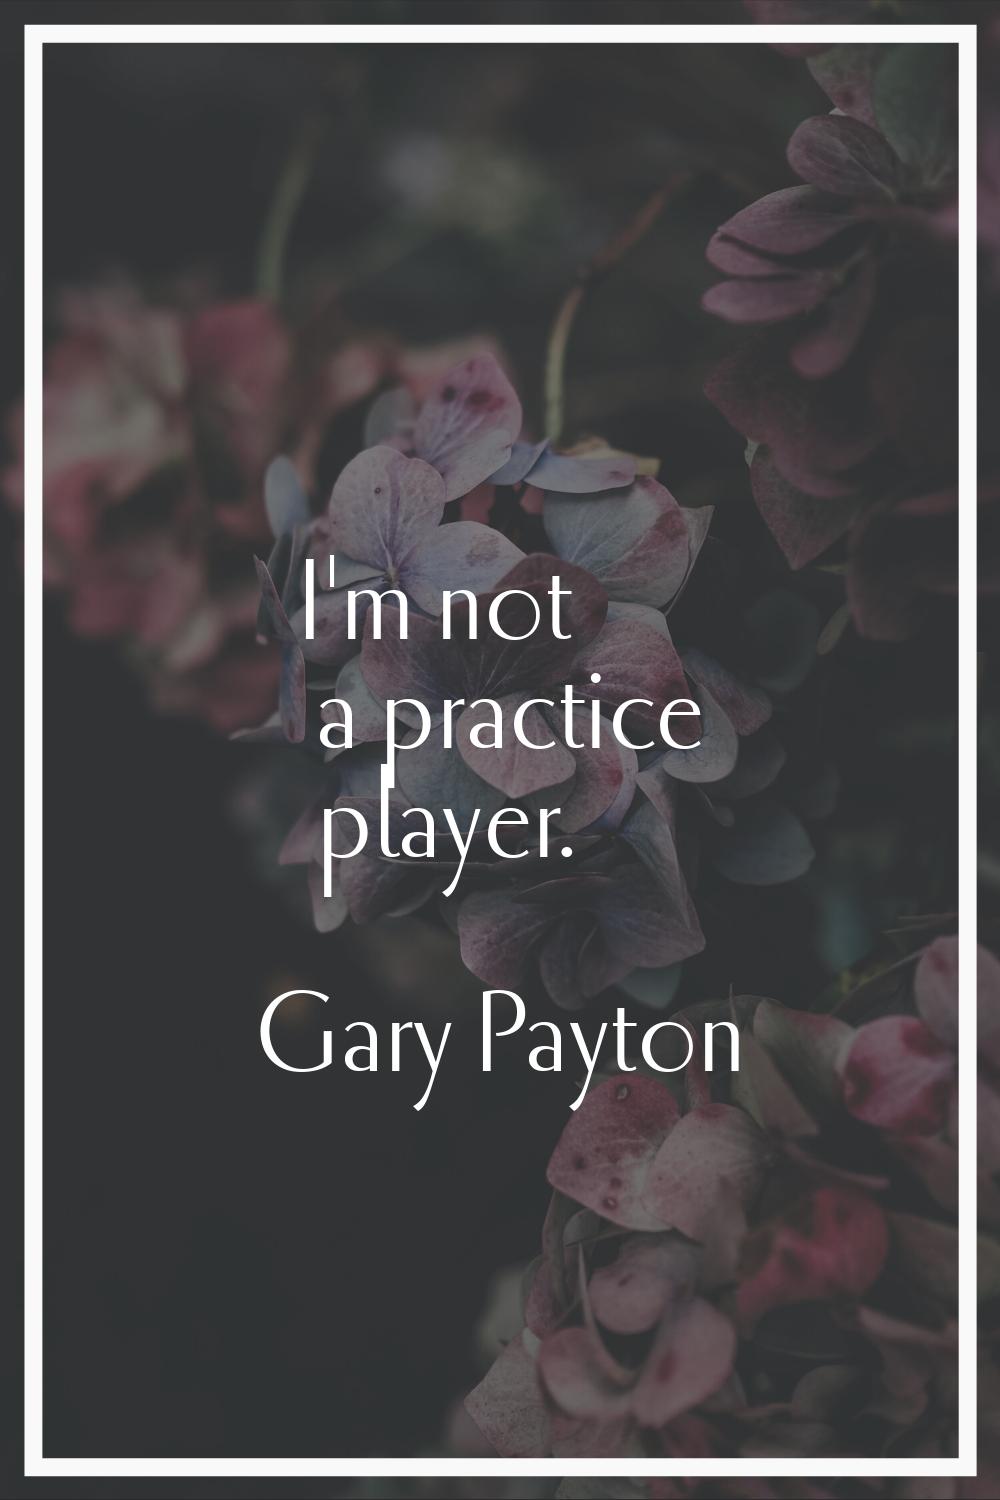 I'm not a practice player.